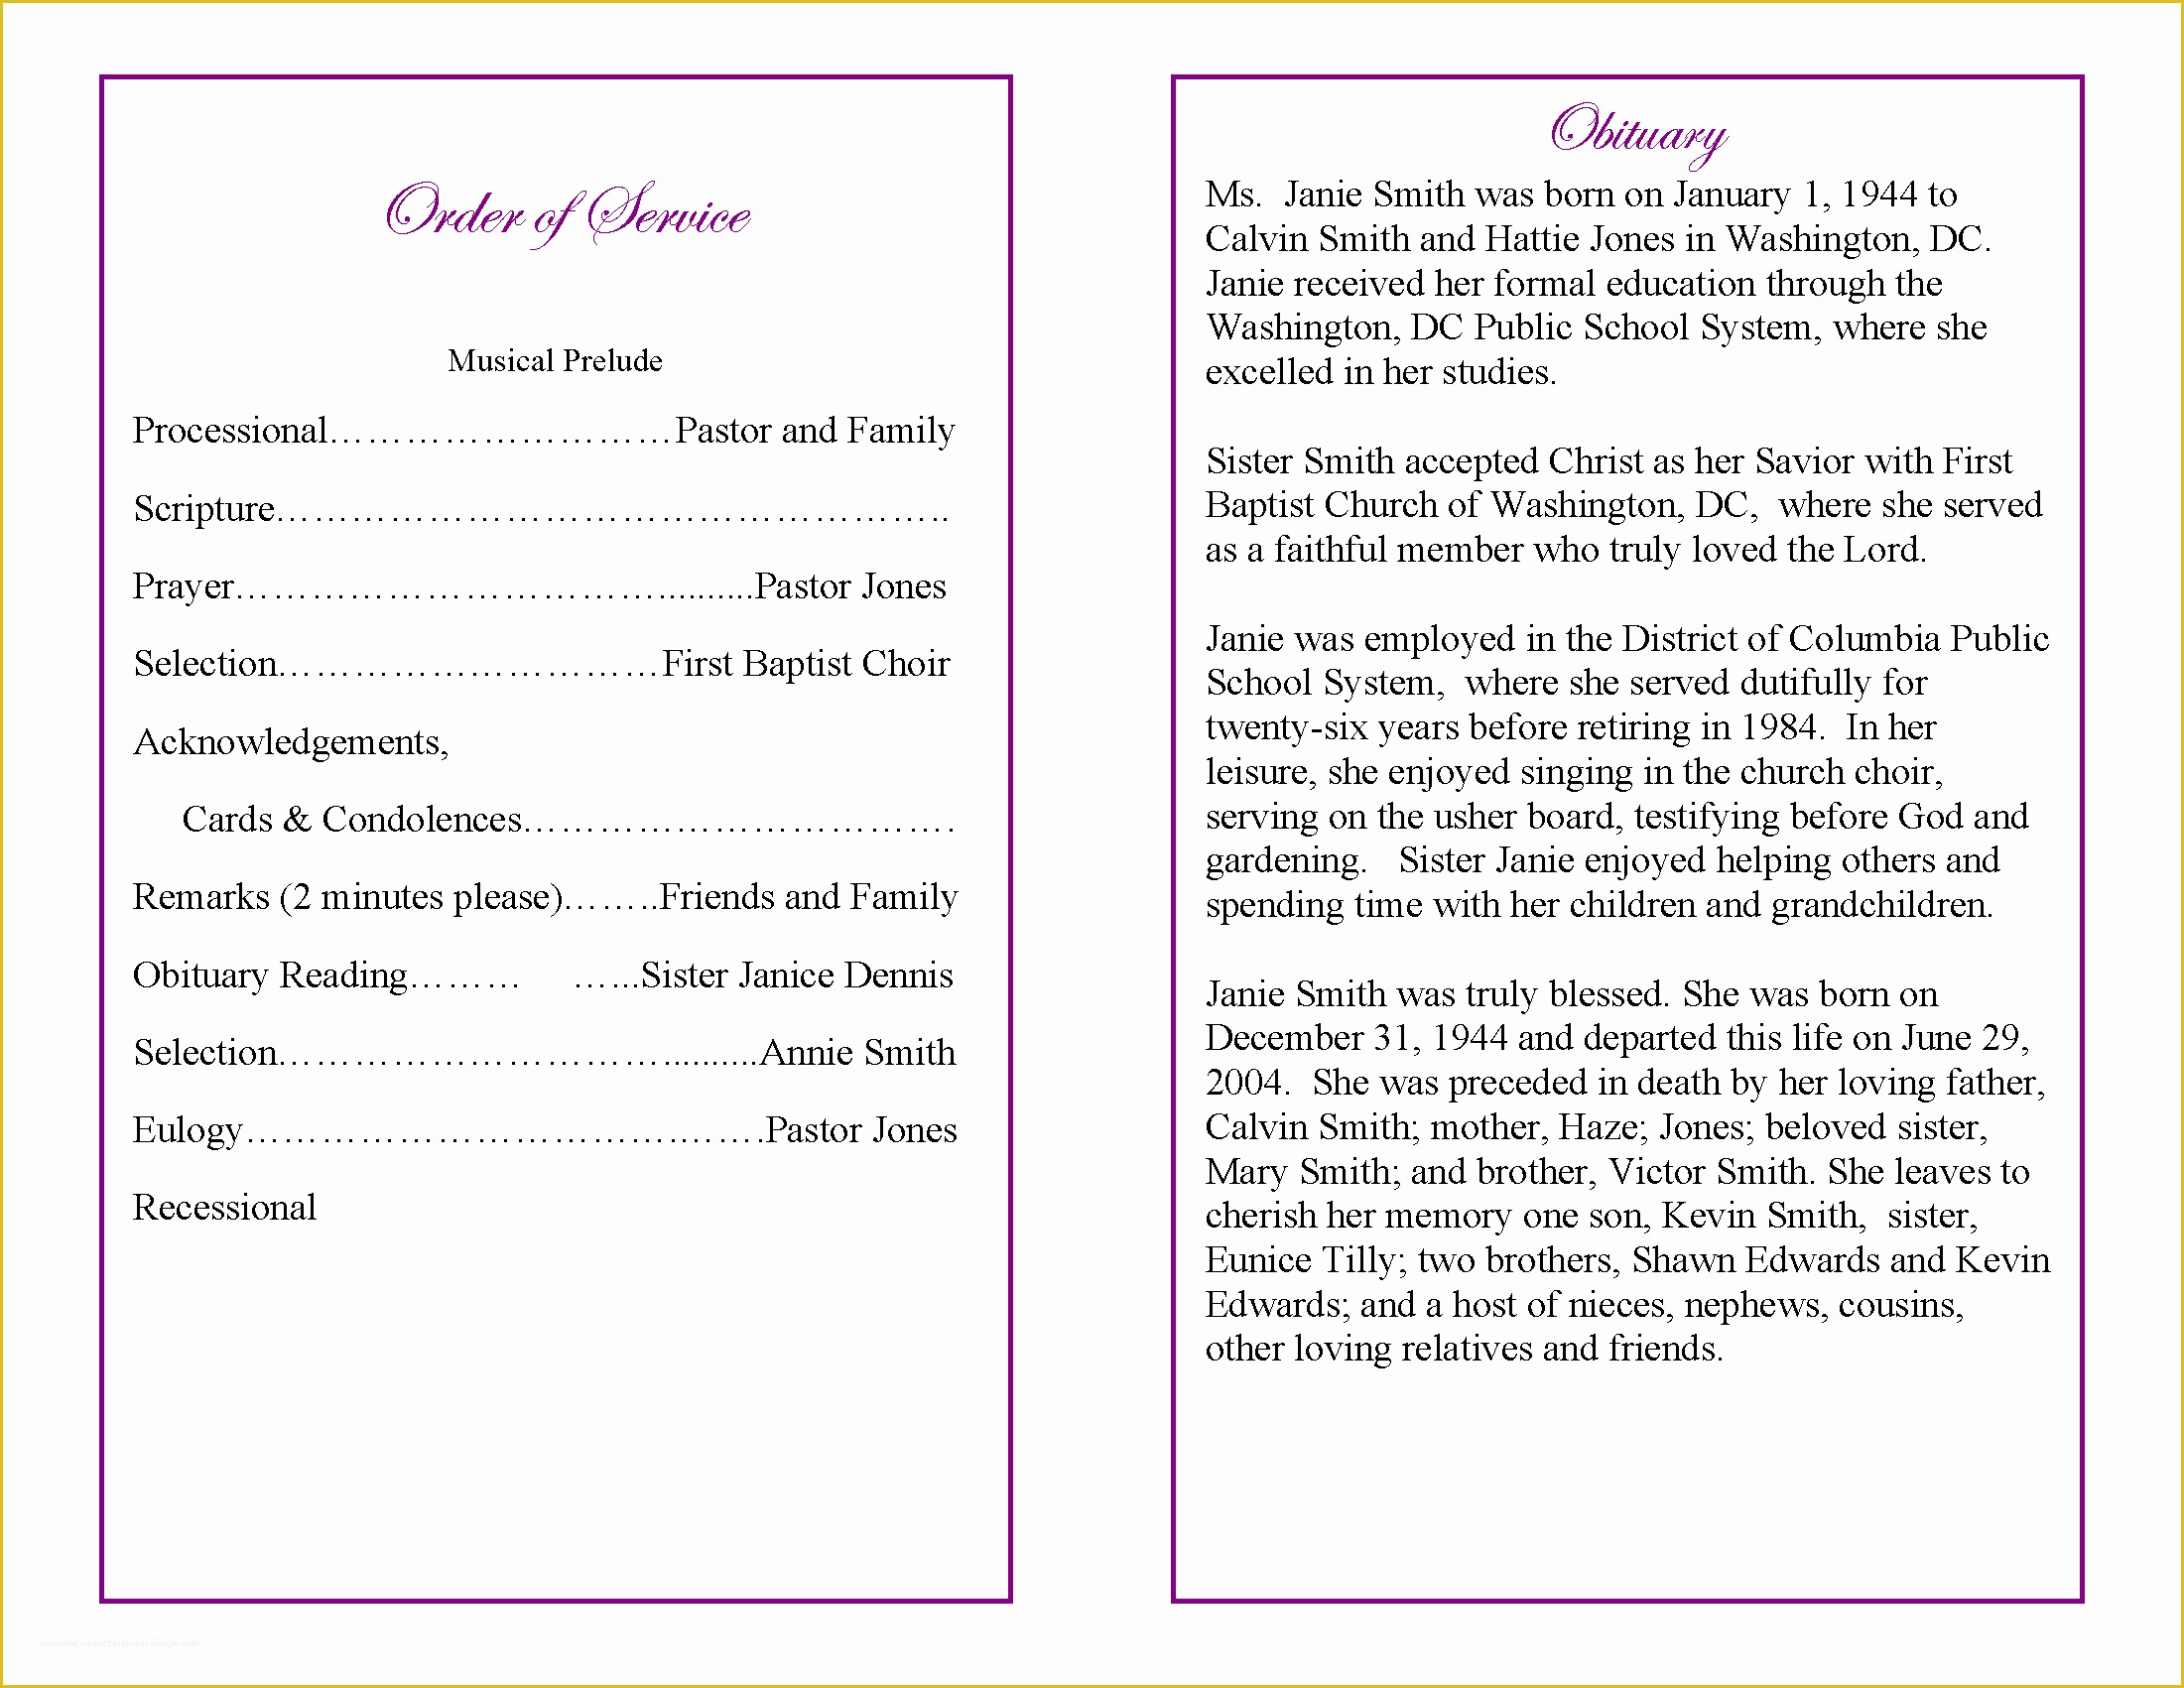 Funeral Program Template With Photos